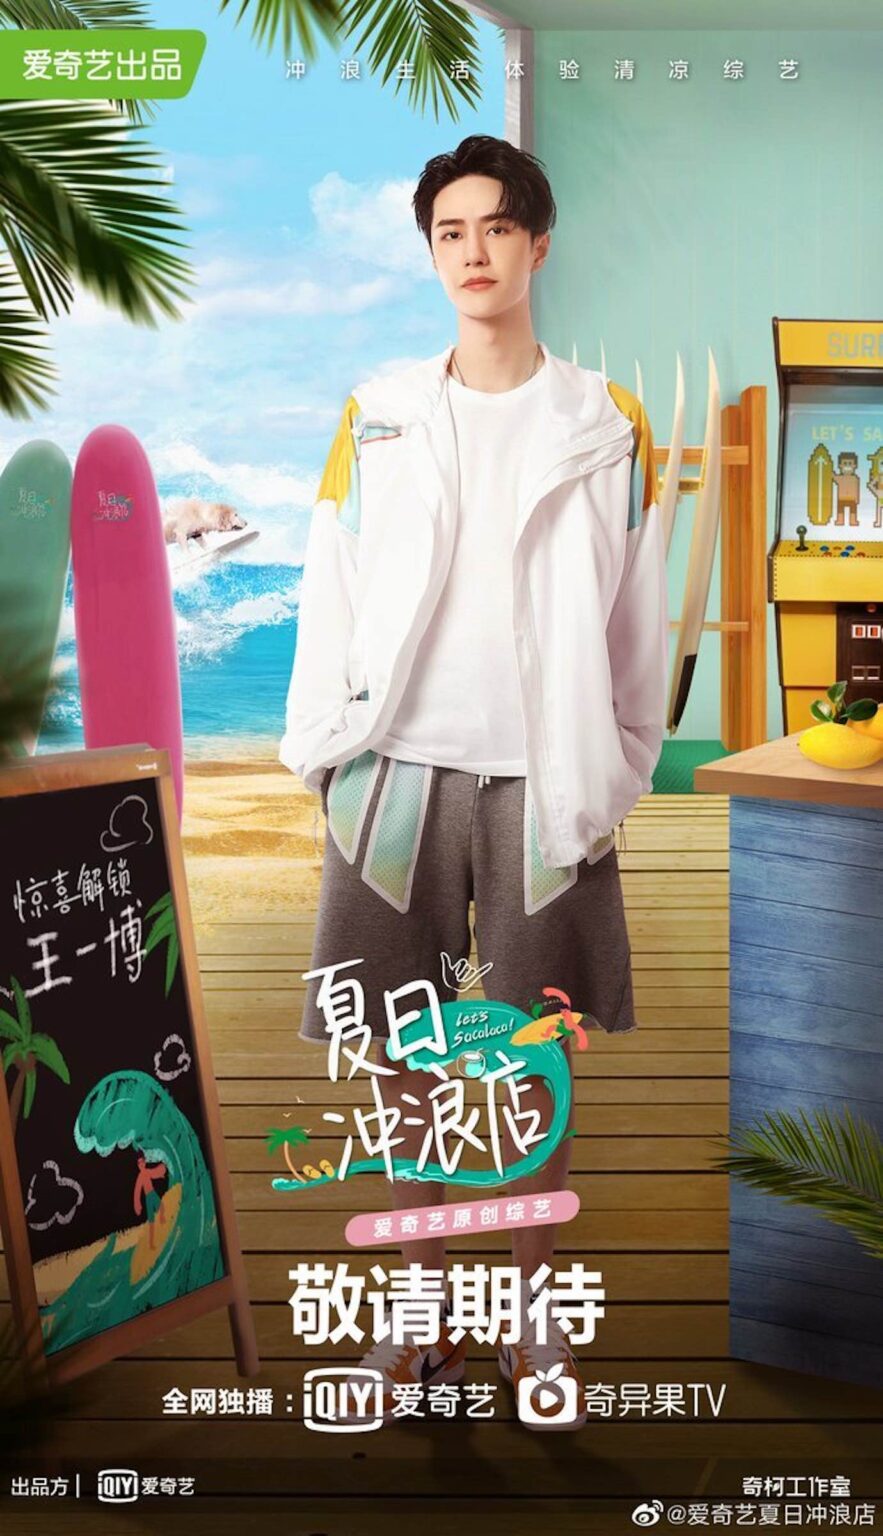 When news dropped that Wang Yibo was appearing as a guest on the variety show 'Summer Surf Shop', fans lost their minds. Here's why.